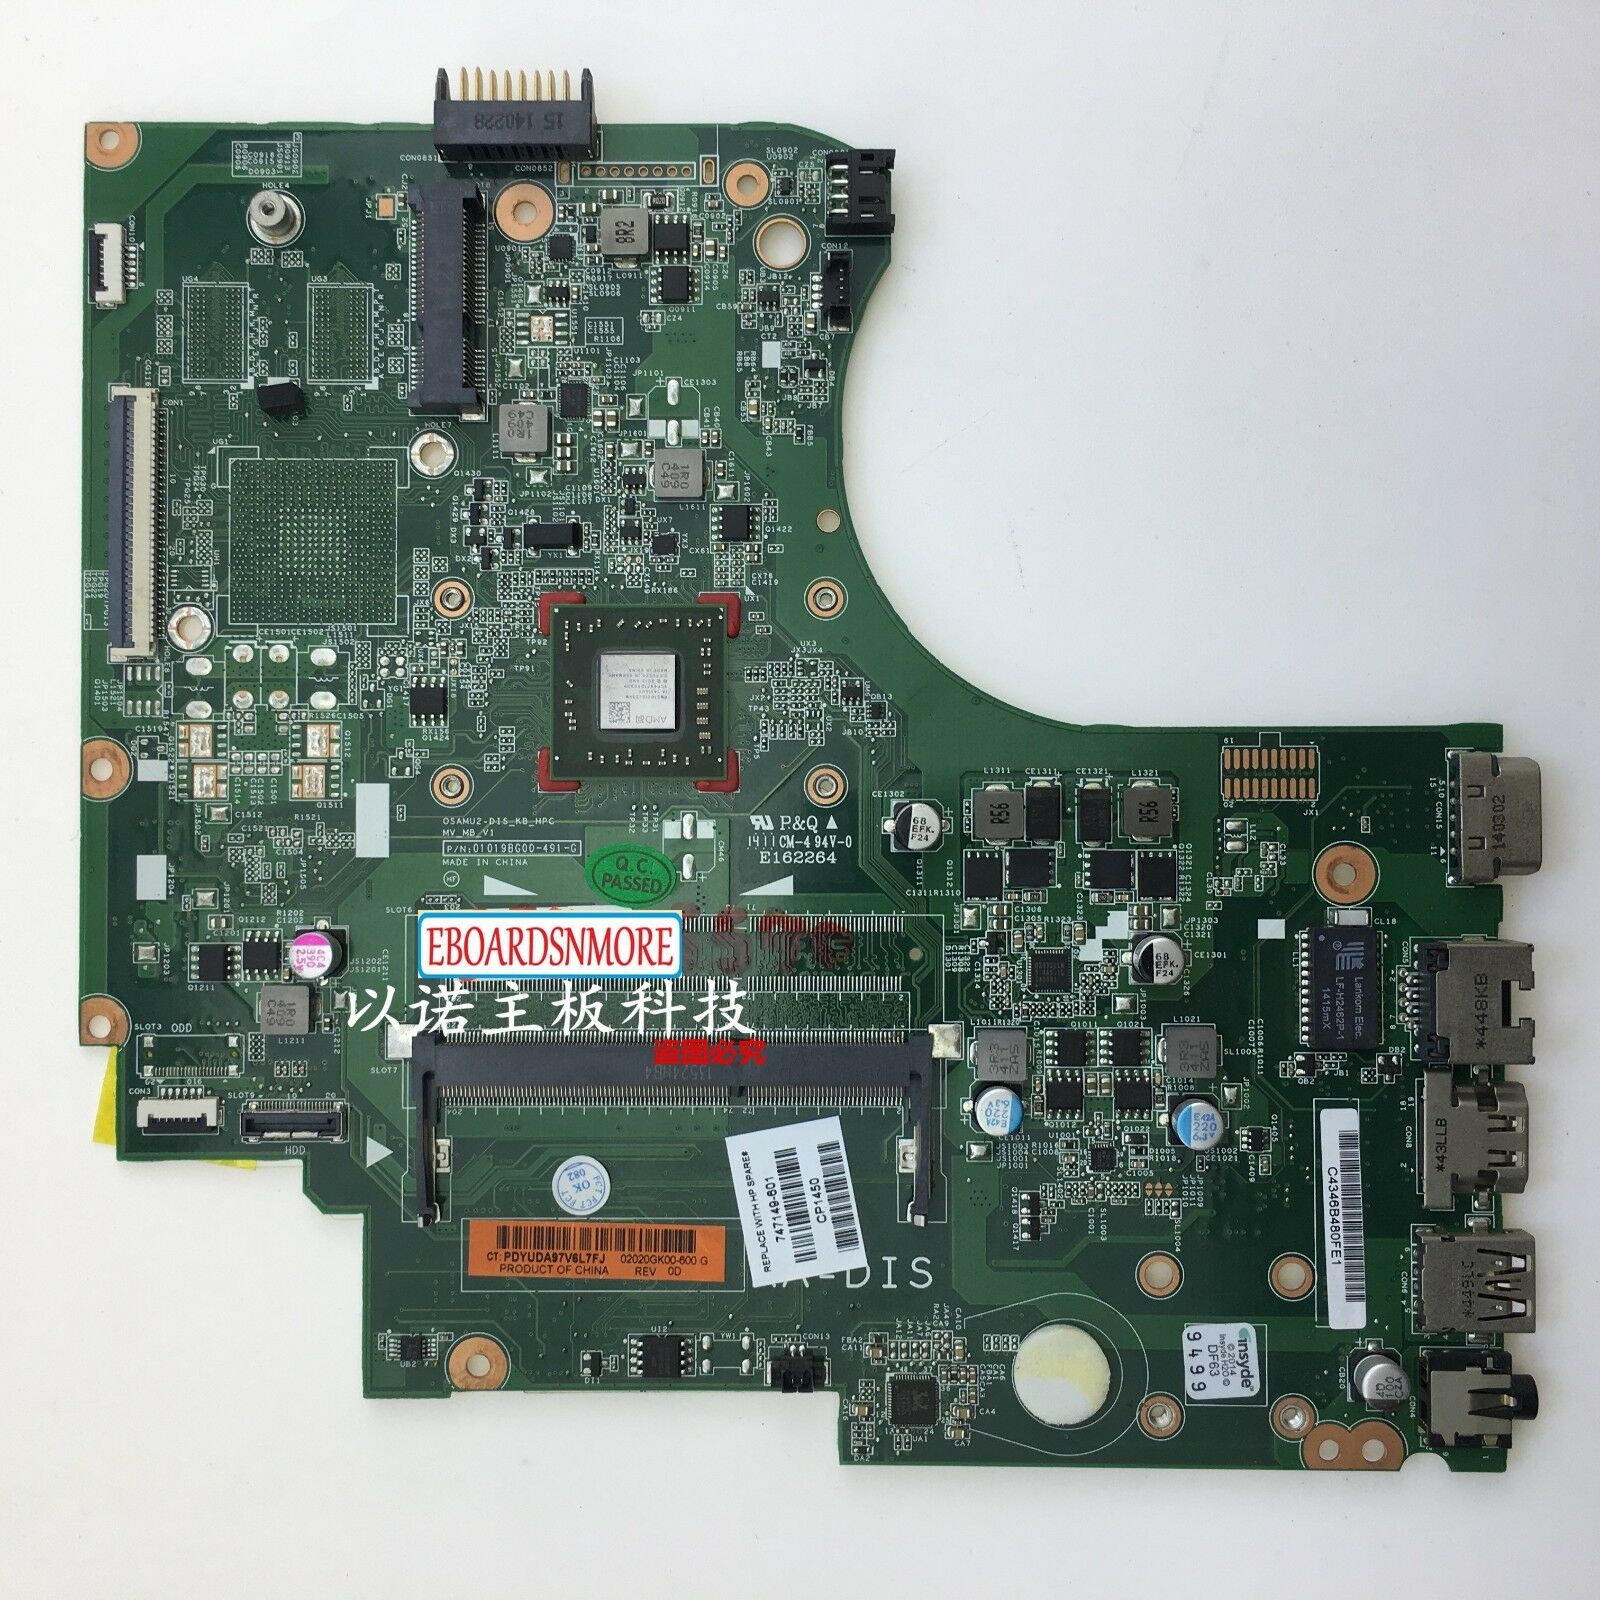 HP 255-G2 15-D laptop motherboard AMD E1 CPU 747149-601 747149-001 747149-501 Compatible CPU Brand: Intel MP - Click Image to Close